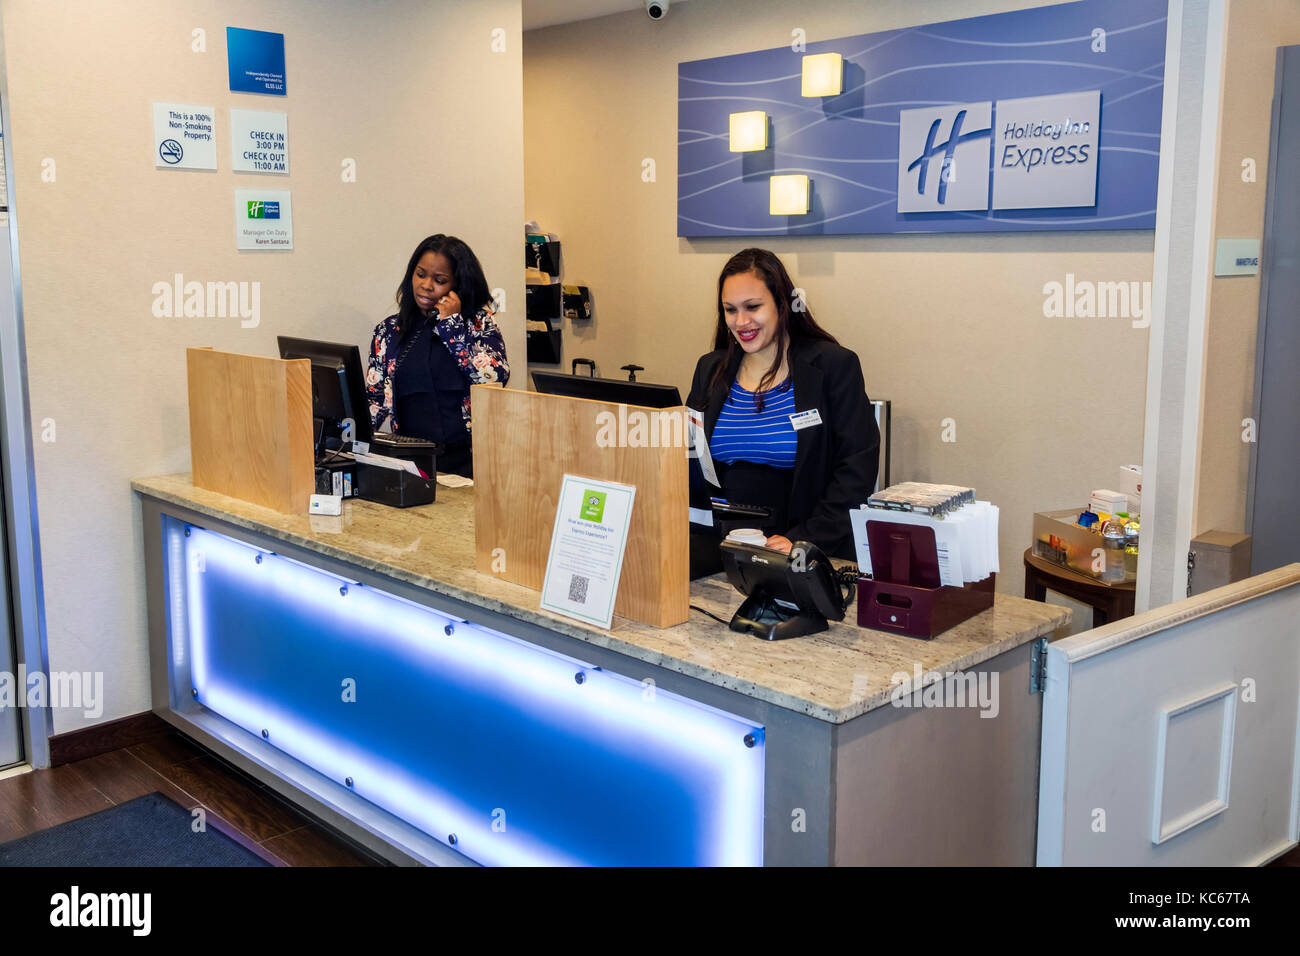 Maryland,Silver Spring,Holiday Inn Express,hotel,front desk check in reception reservation reservations register registration,Black woman female women Stock Photo